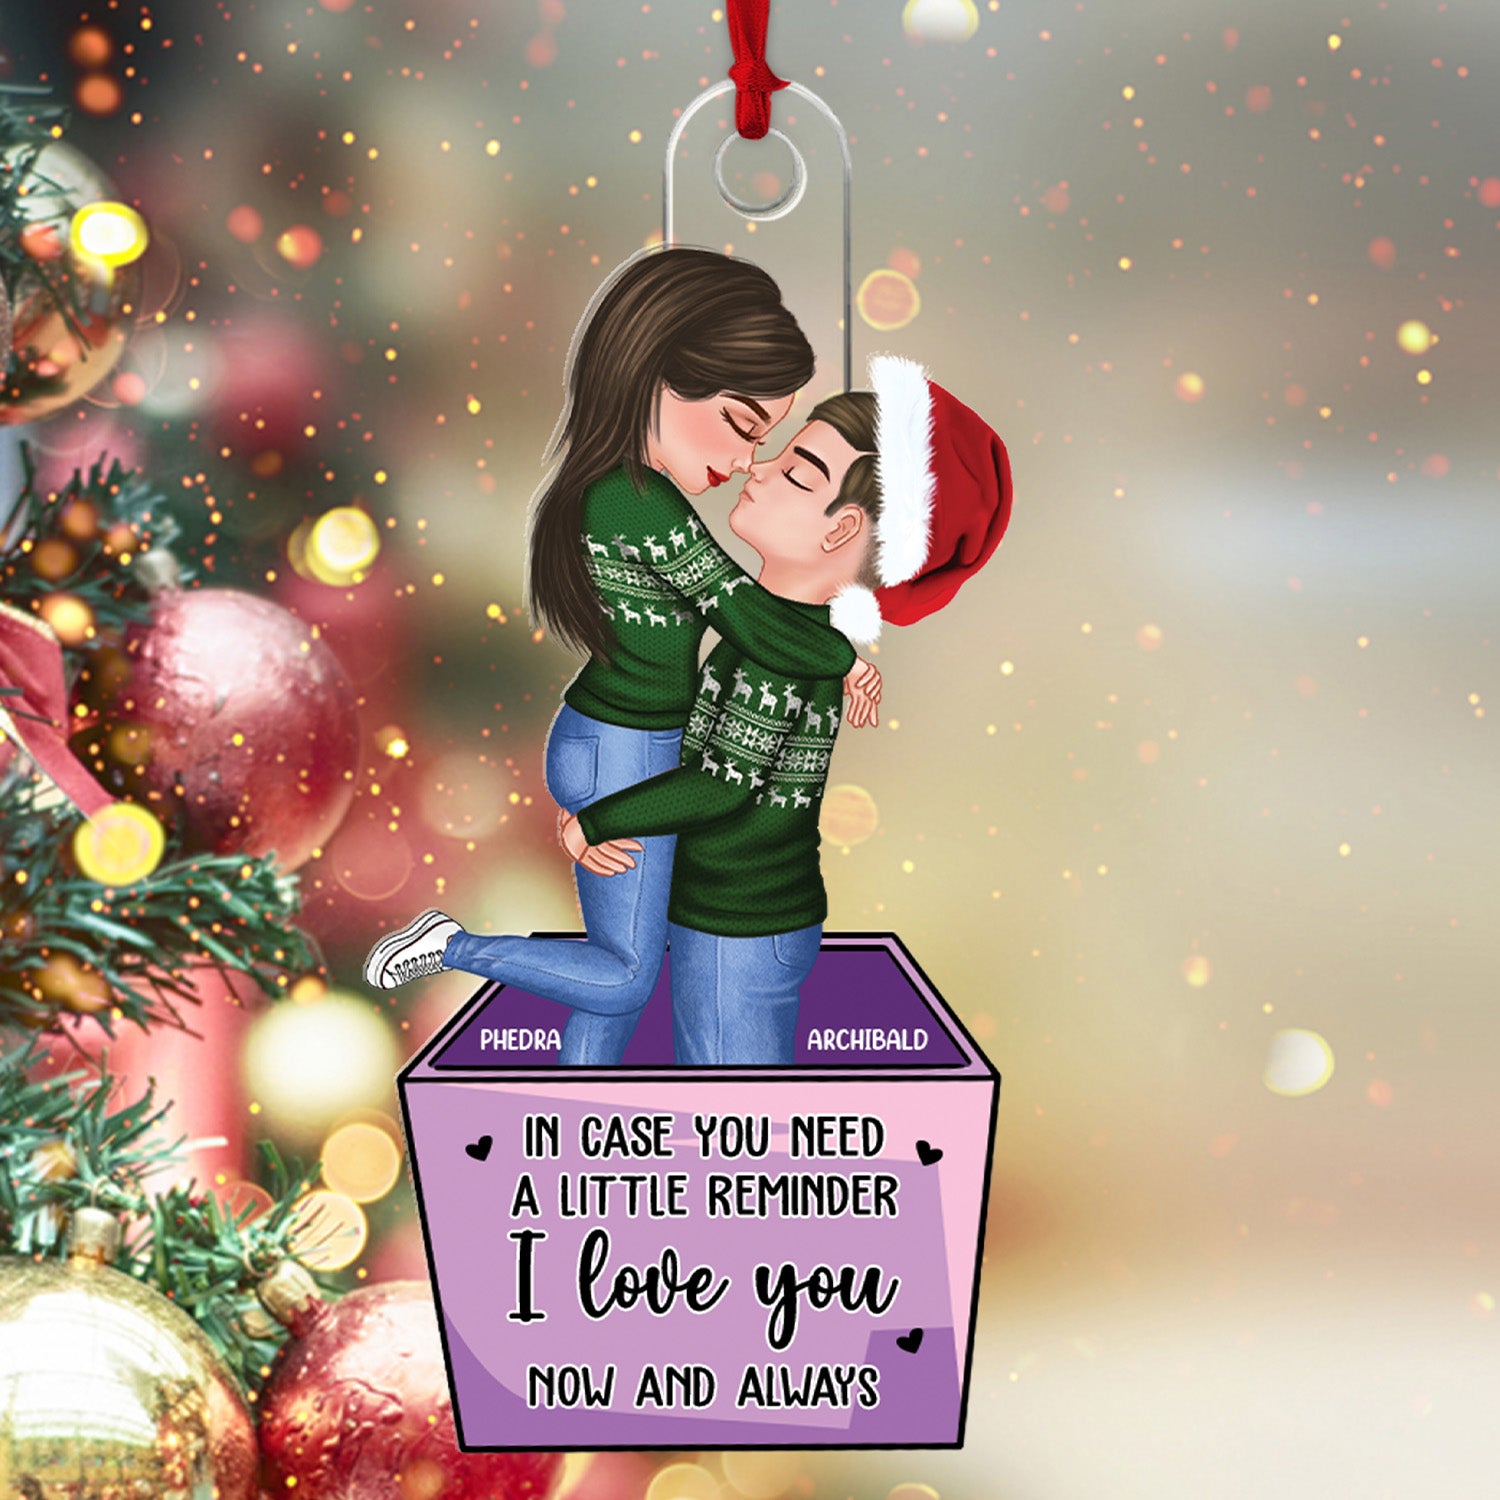 Couple In Christmas In Case You Need a Little Reminder - Personalized Custom Shape Acrylic Ornament